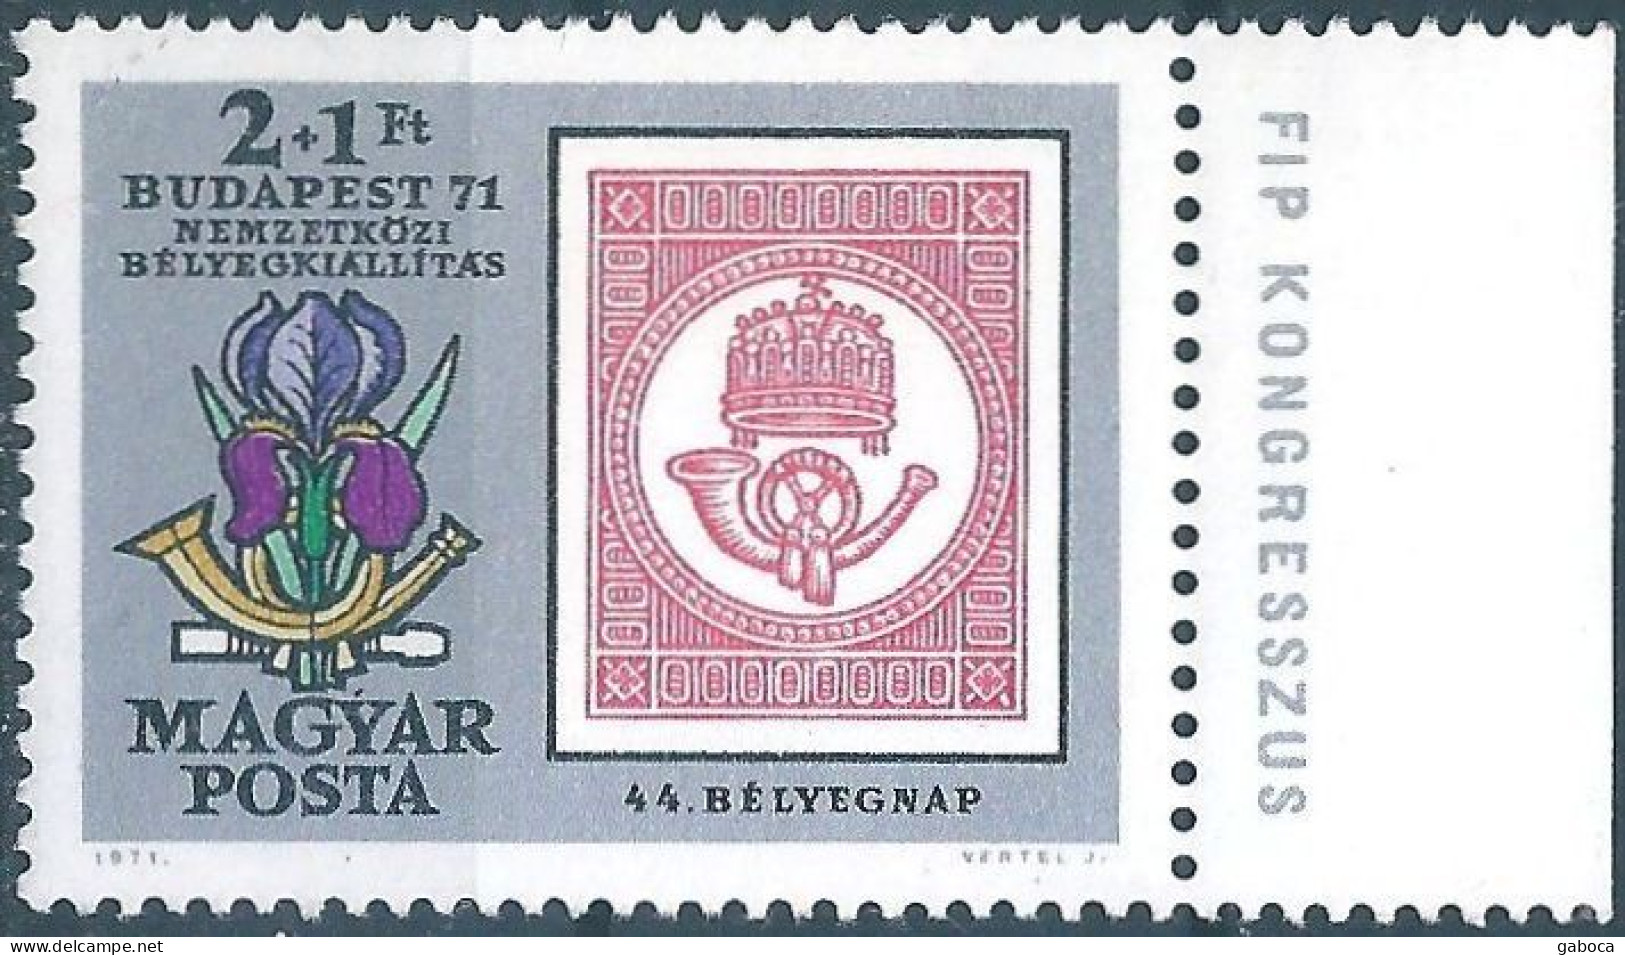 C5927 Hungary Philately Stamps Day Music Horn Flower MNH RARE - Stamp's Day